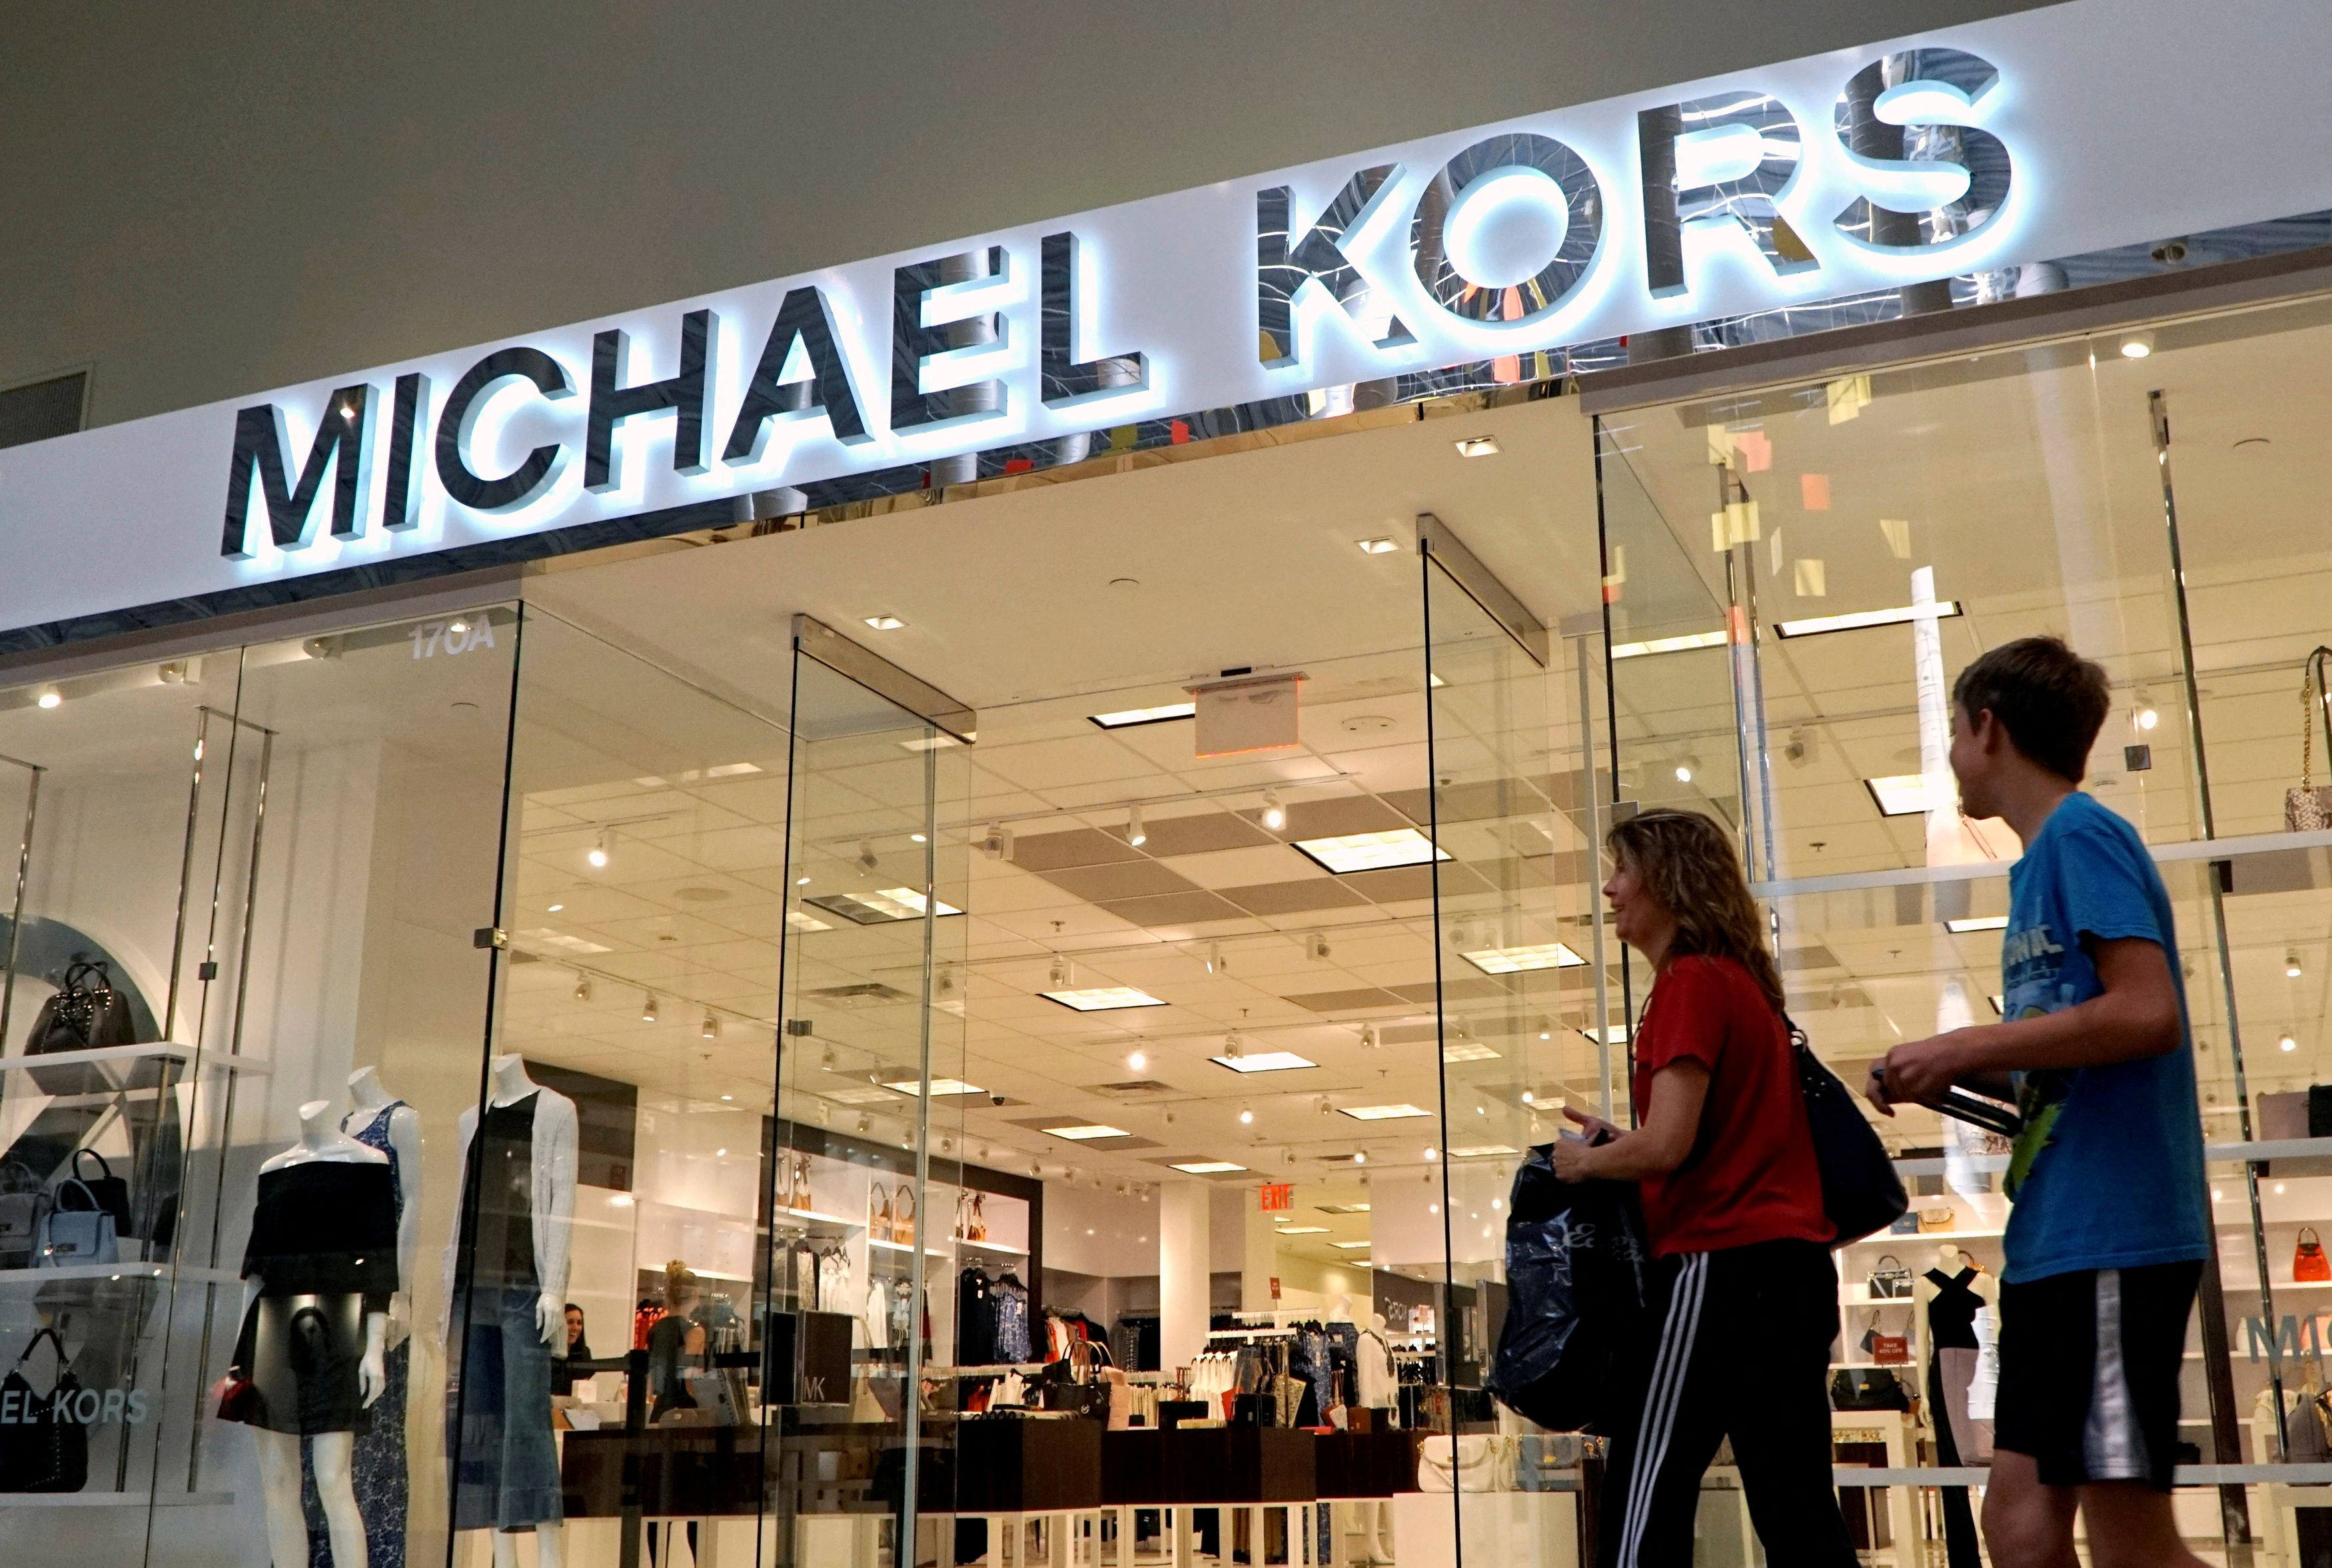 MICHAEL KORS OUTLET STORE WALK THROUGH 2019  YouTube